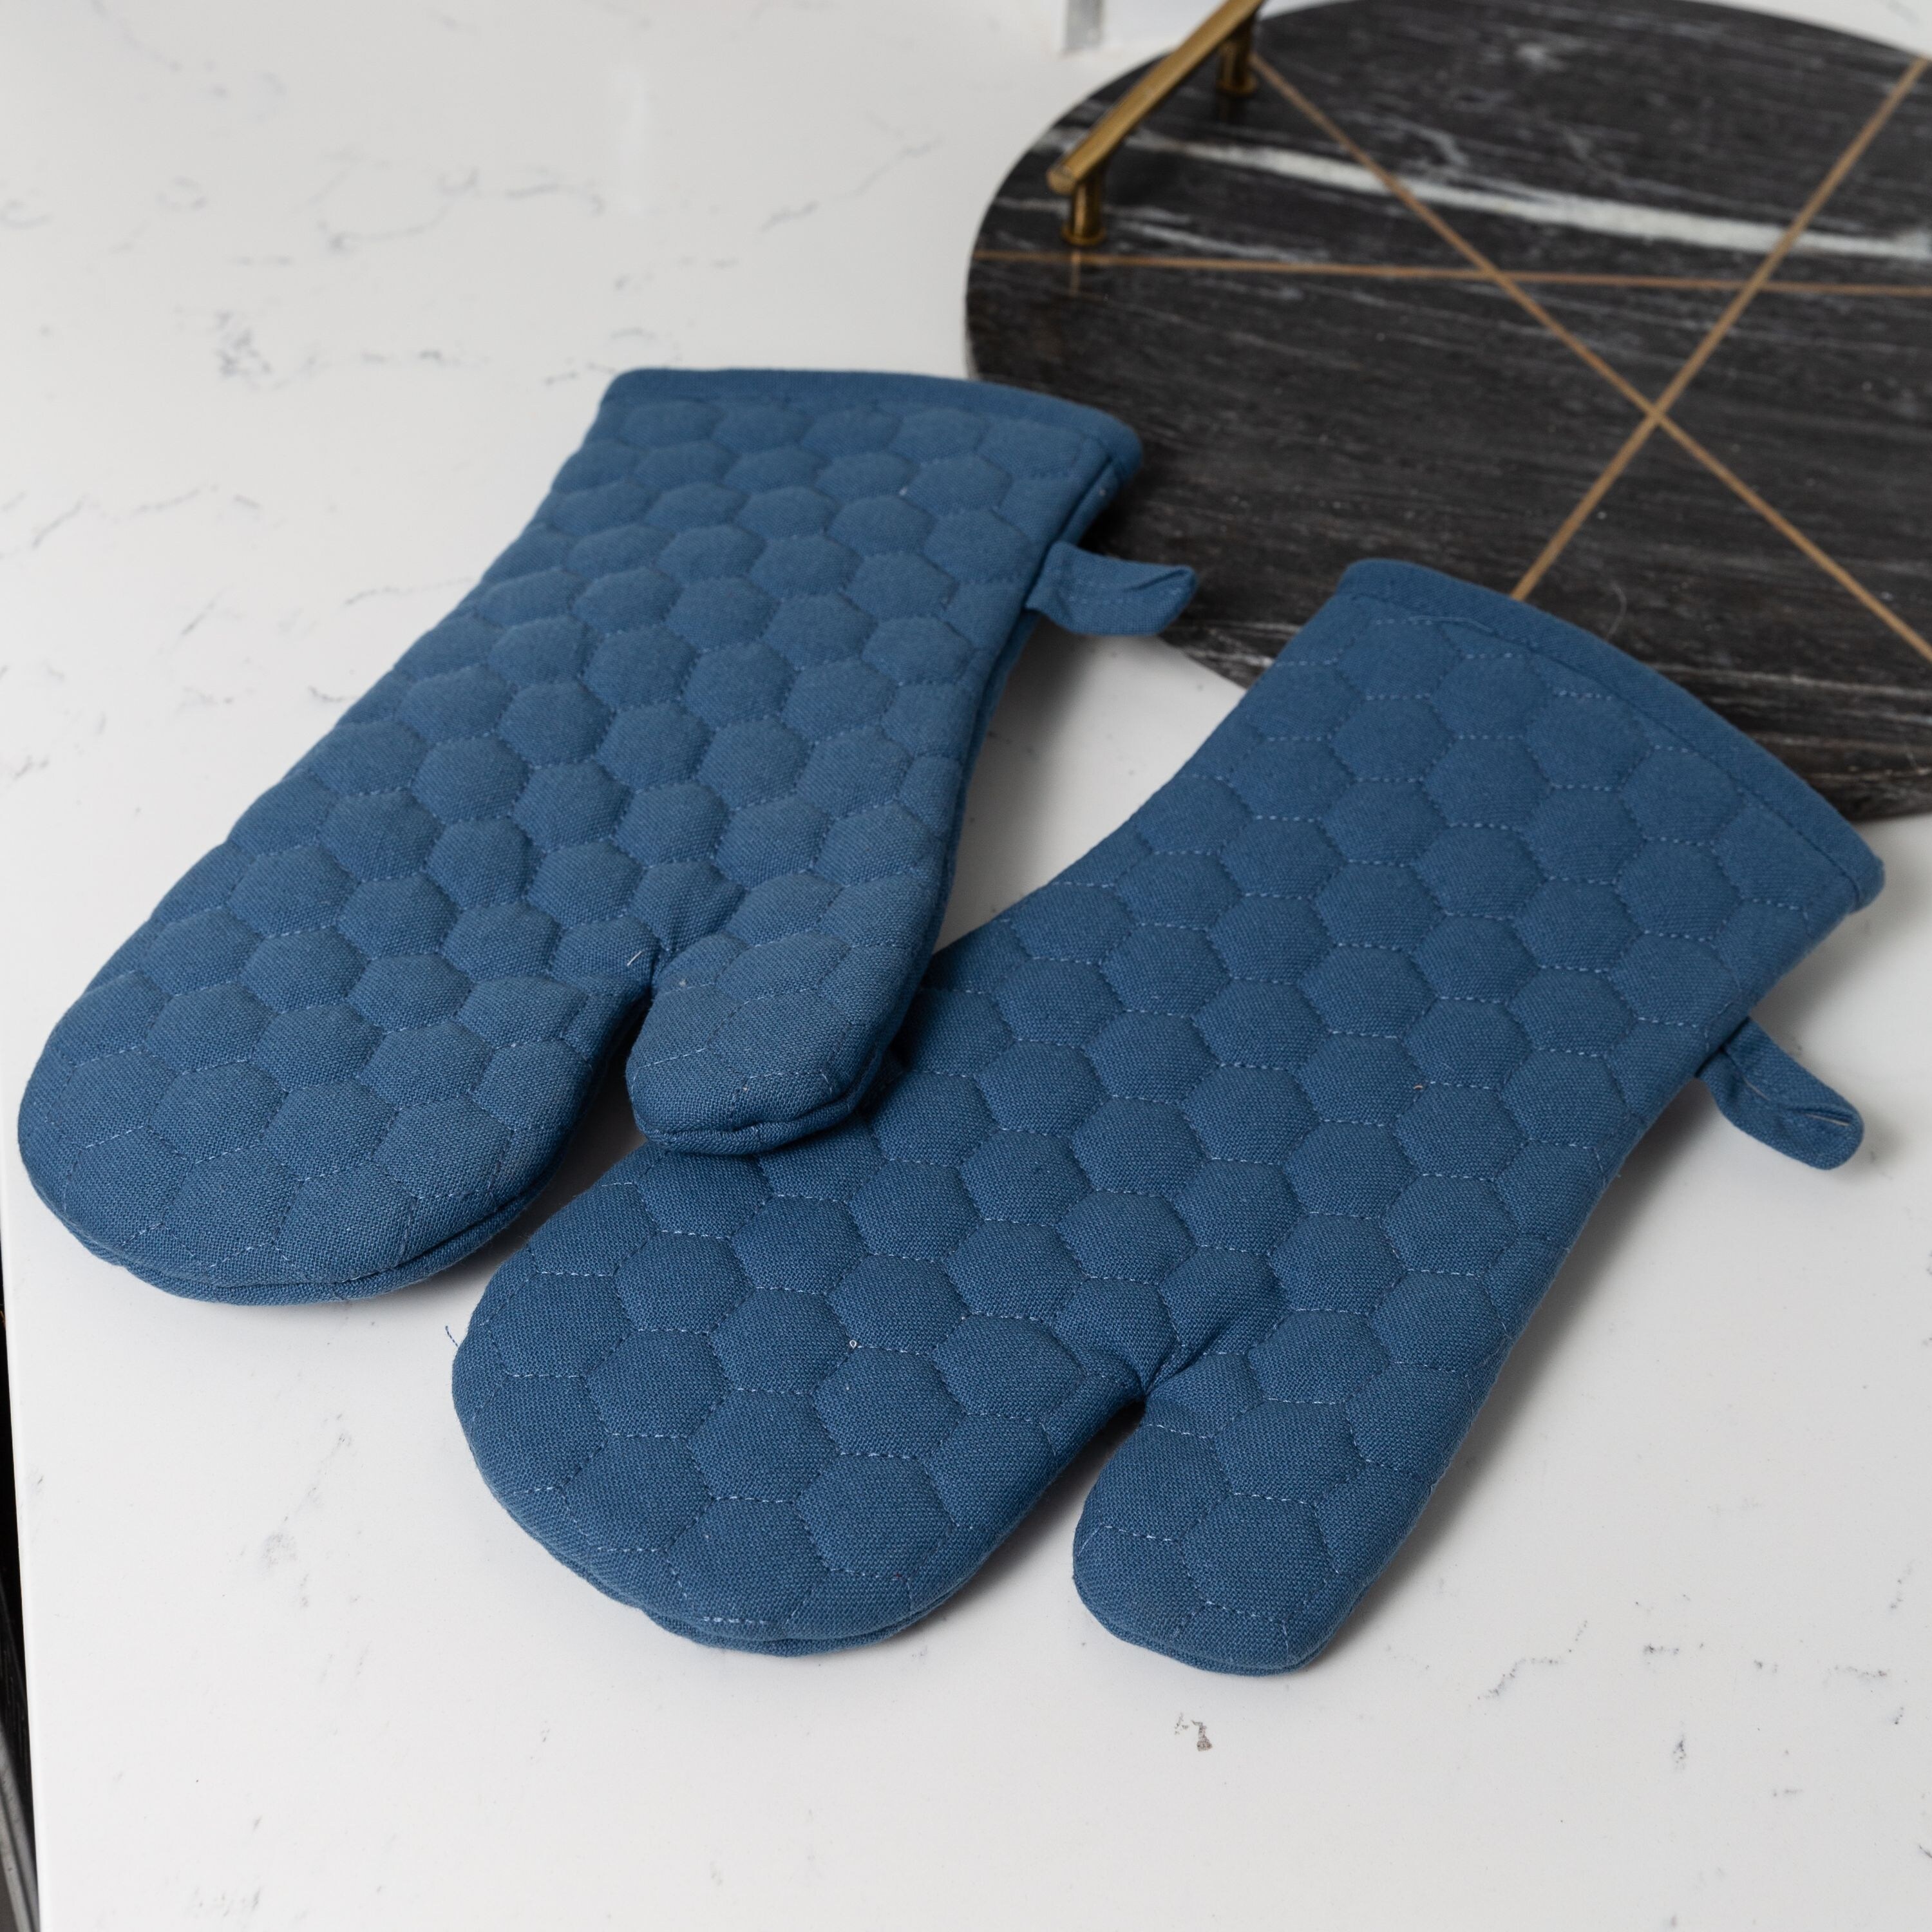 https://ak1.ostkcdn.com/images/products/is/images/direct/dfe0614a3a8fa7b0774a9eb1dbd366bdbd0bc1c9/Fabstyles-Fouta-Cotton-Oven-Mitt-Set-of-2.jpg